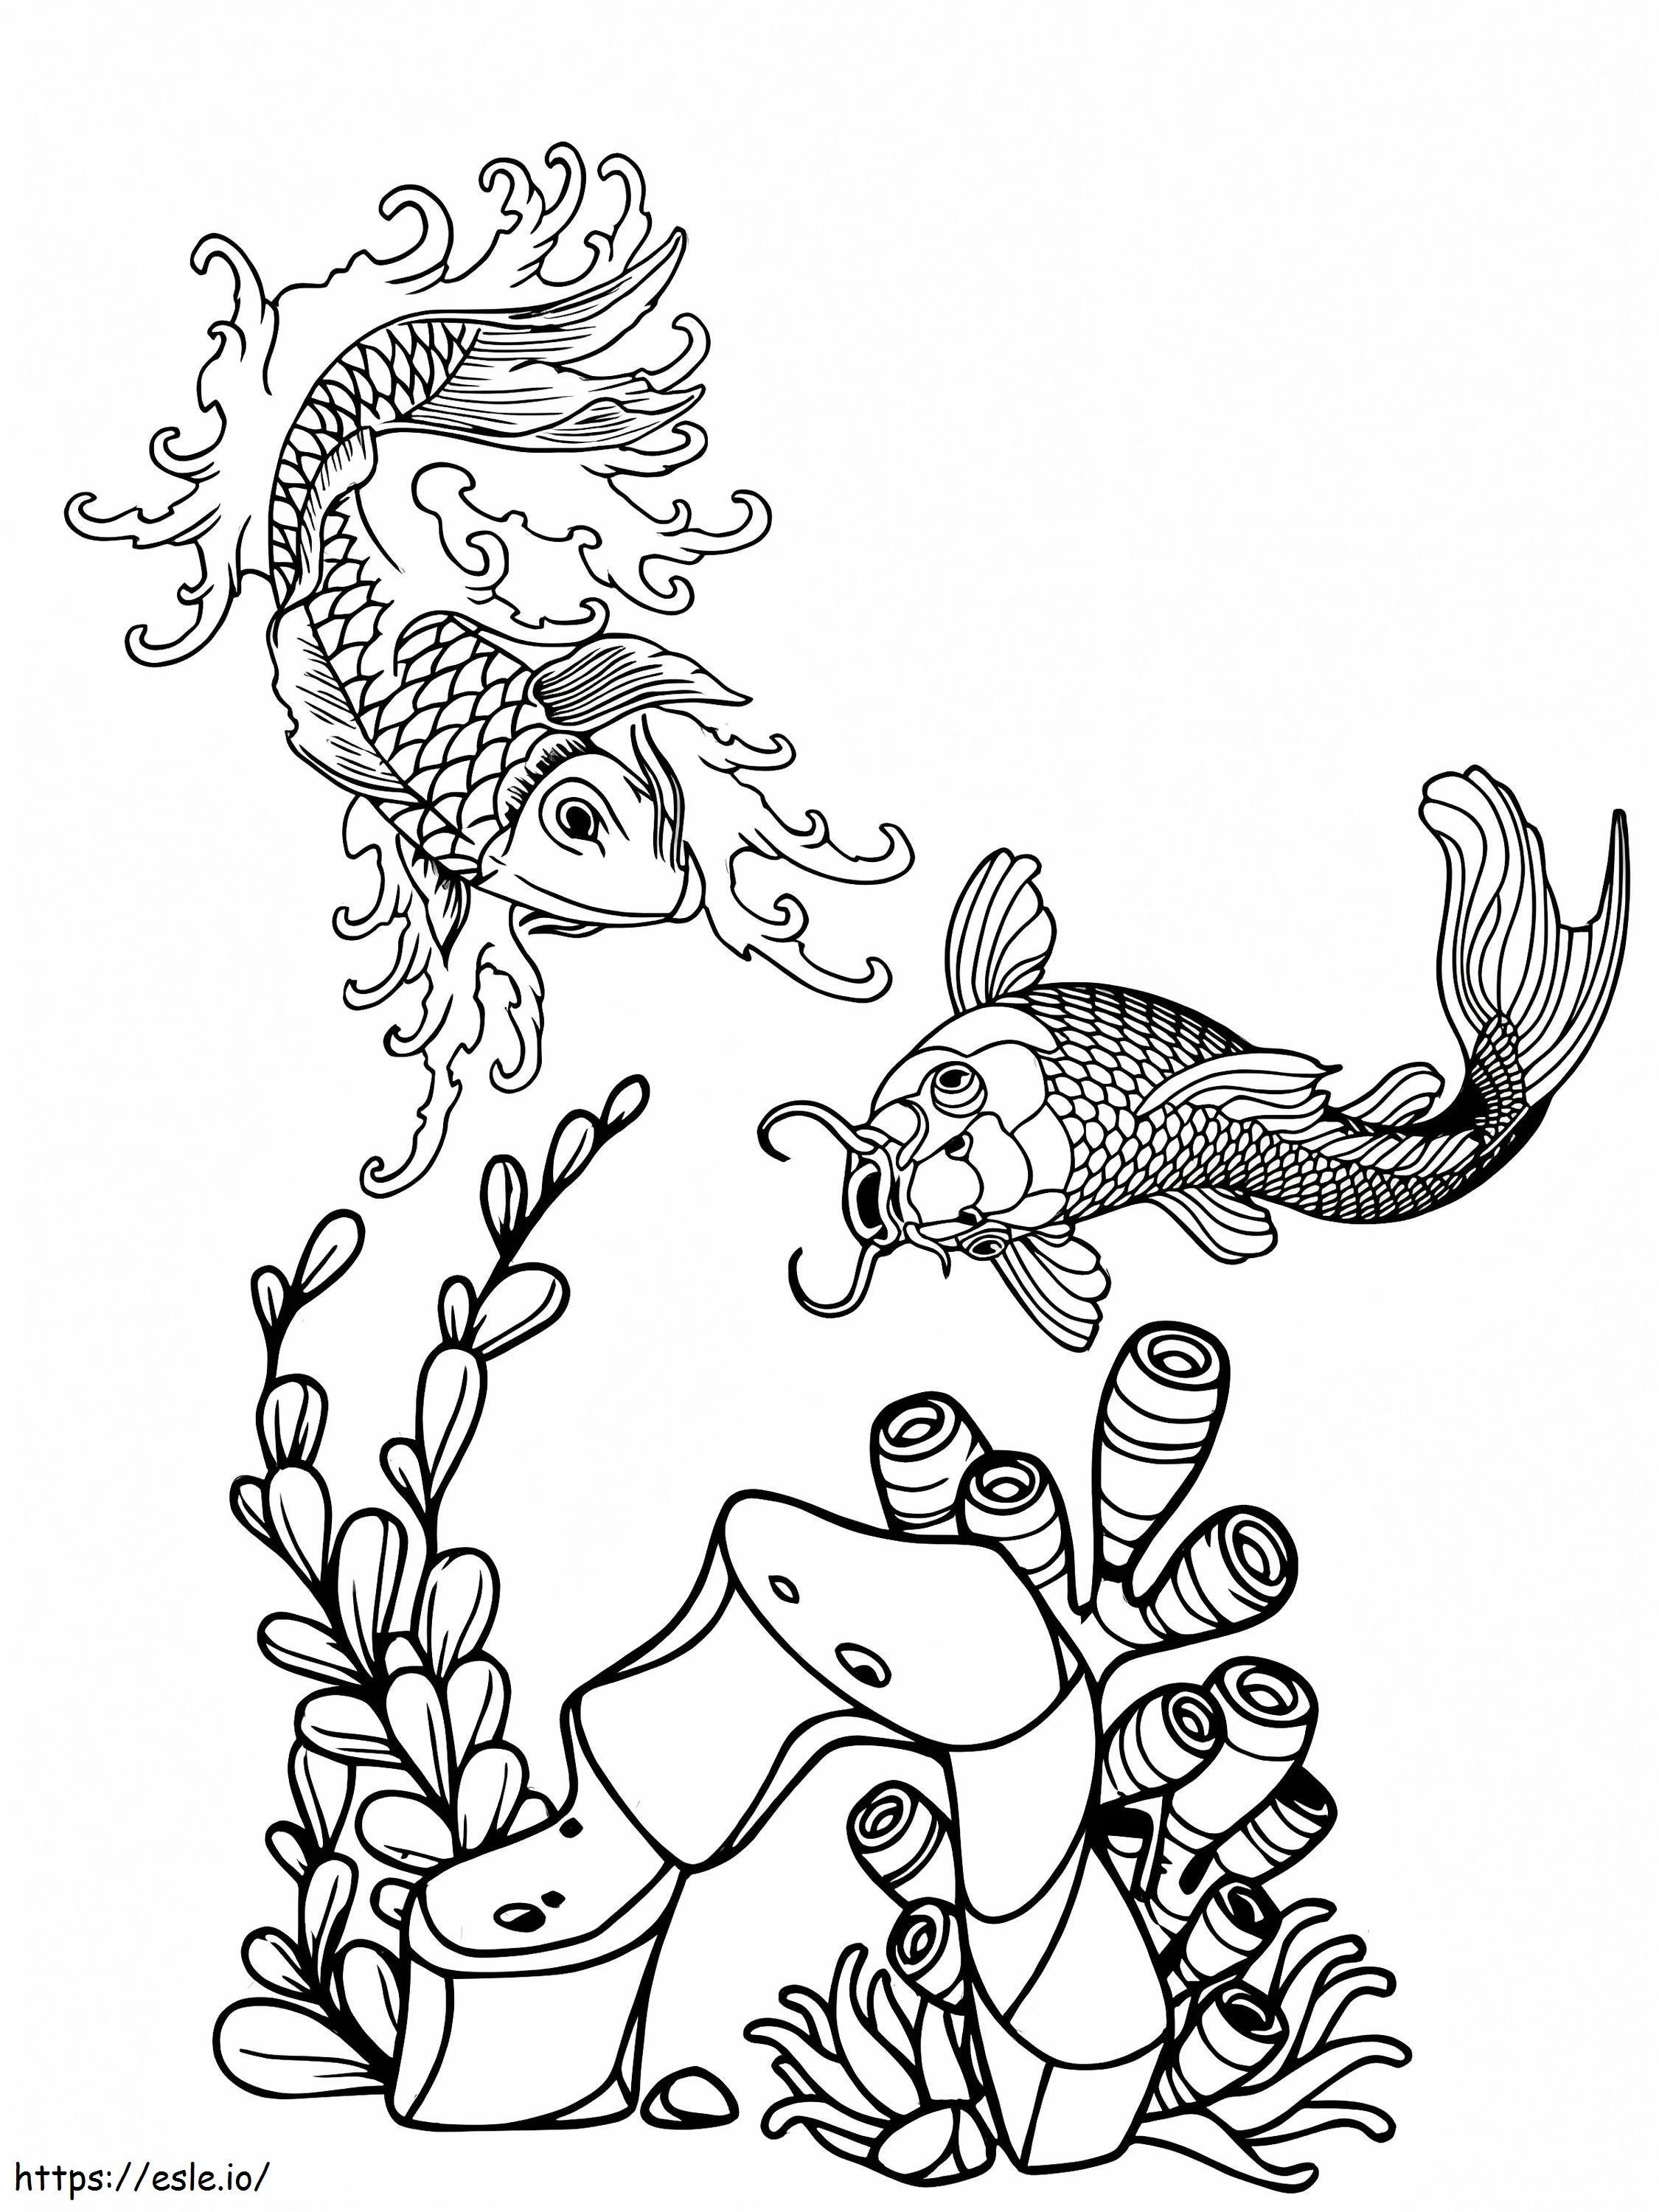 Elegant Koi Fishes And Sea Plants coloring page